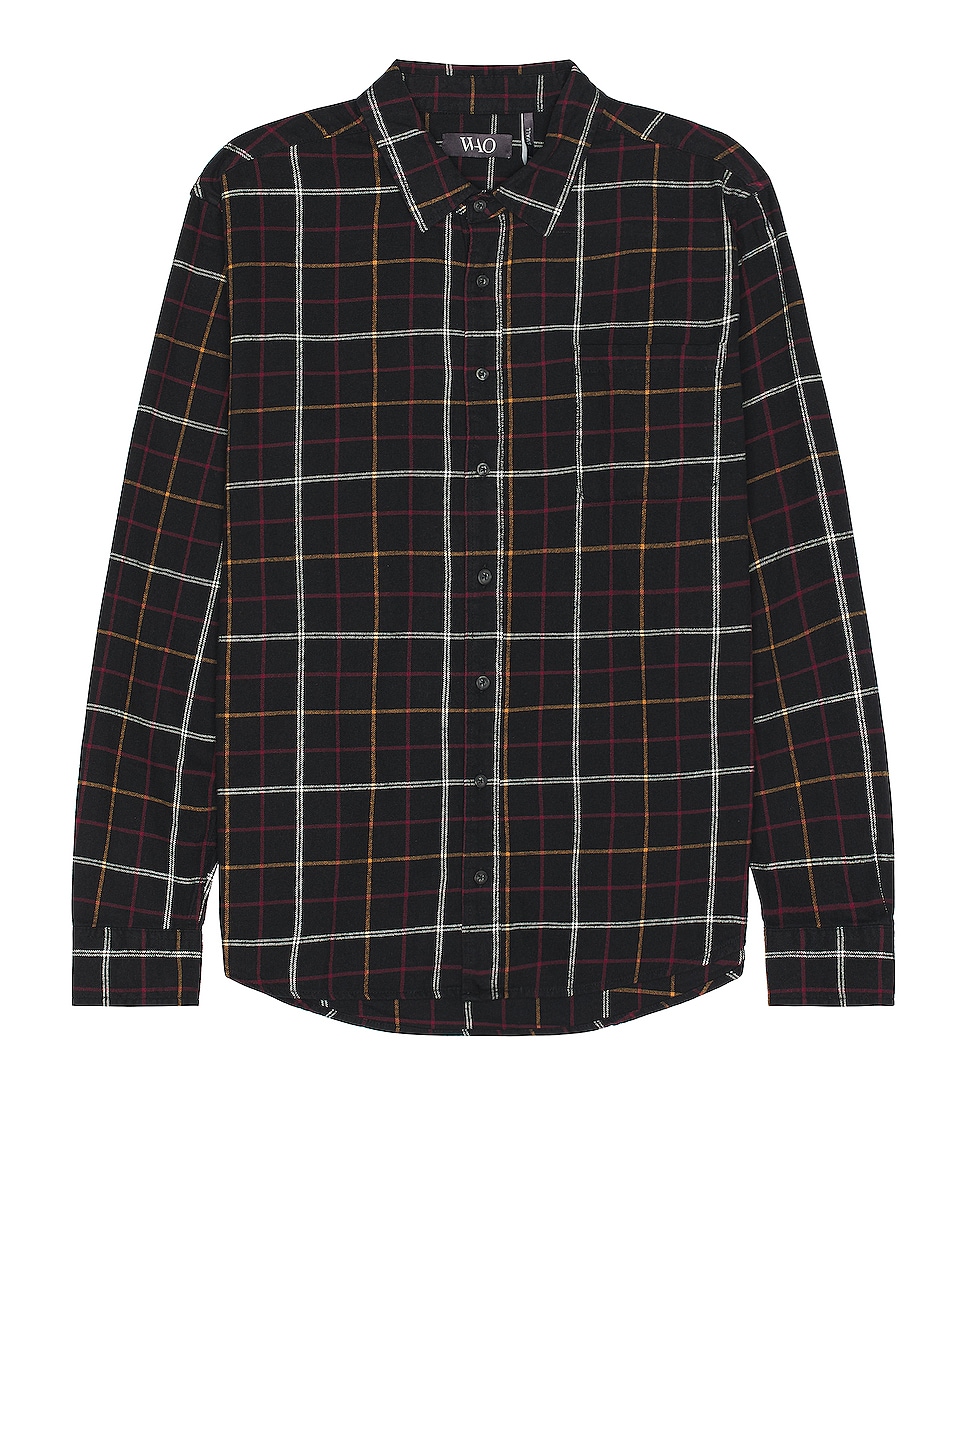 Image 1 of WAO The Flannel Shirt in black & burgundy